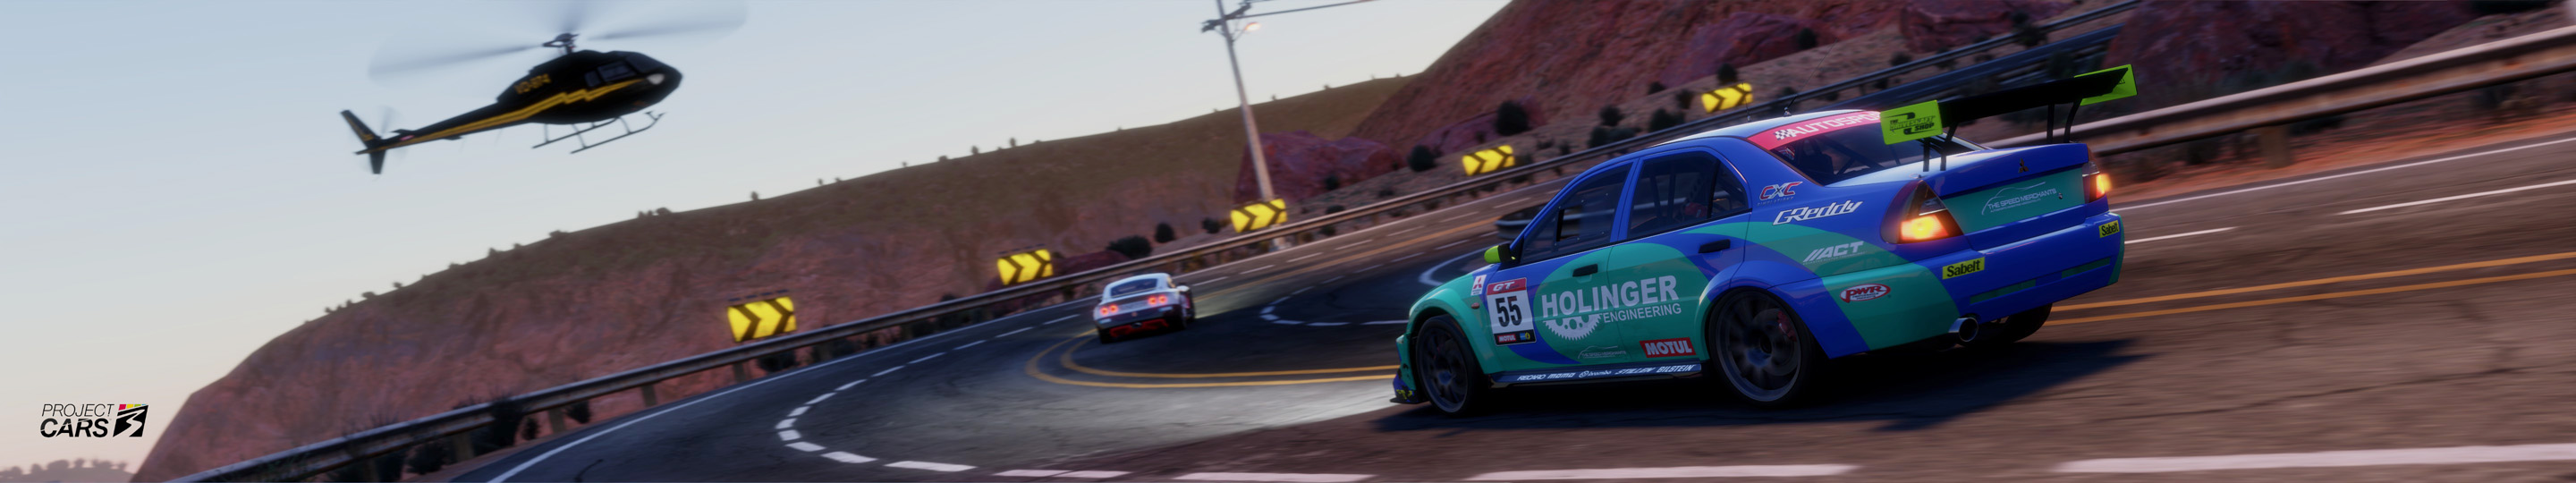 5a PROJECT CARS 3 MONUMENT CANYON with PIR RANGE CARS copy.jpg